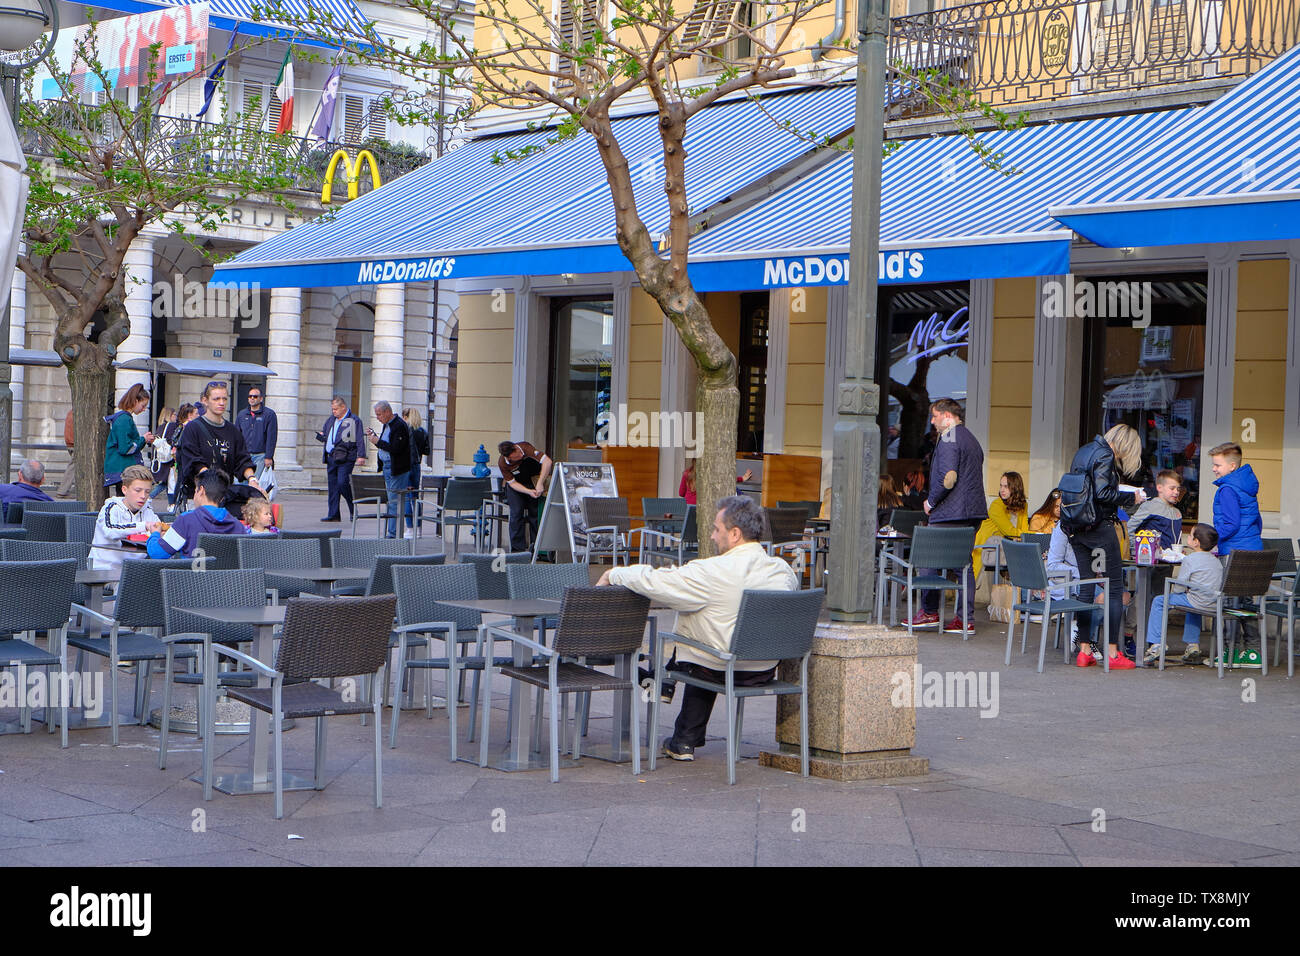 April 18, 2019 : People sitting and enjoying meals purchased at McDonald's restaurant in the city centre square Stock Photo